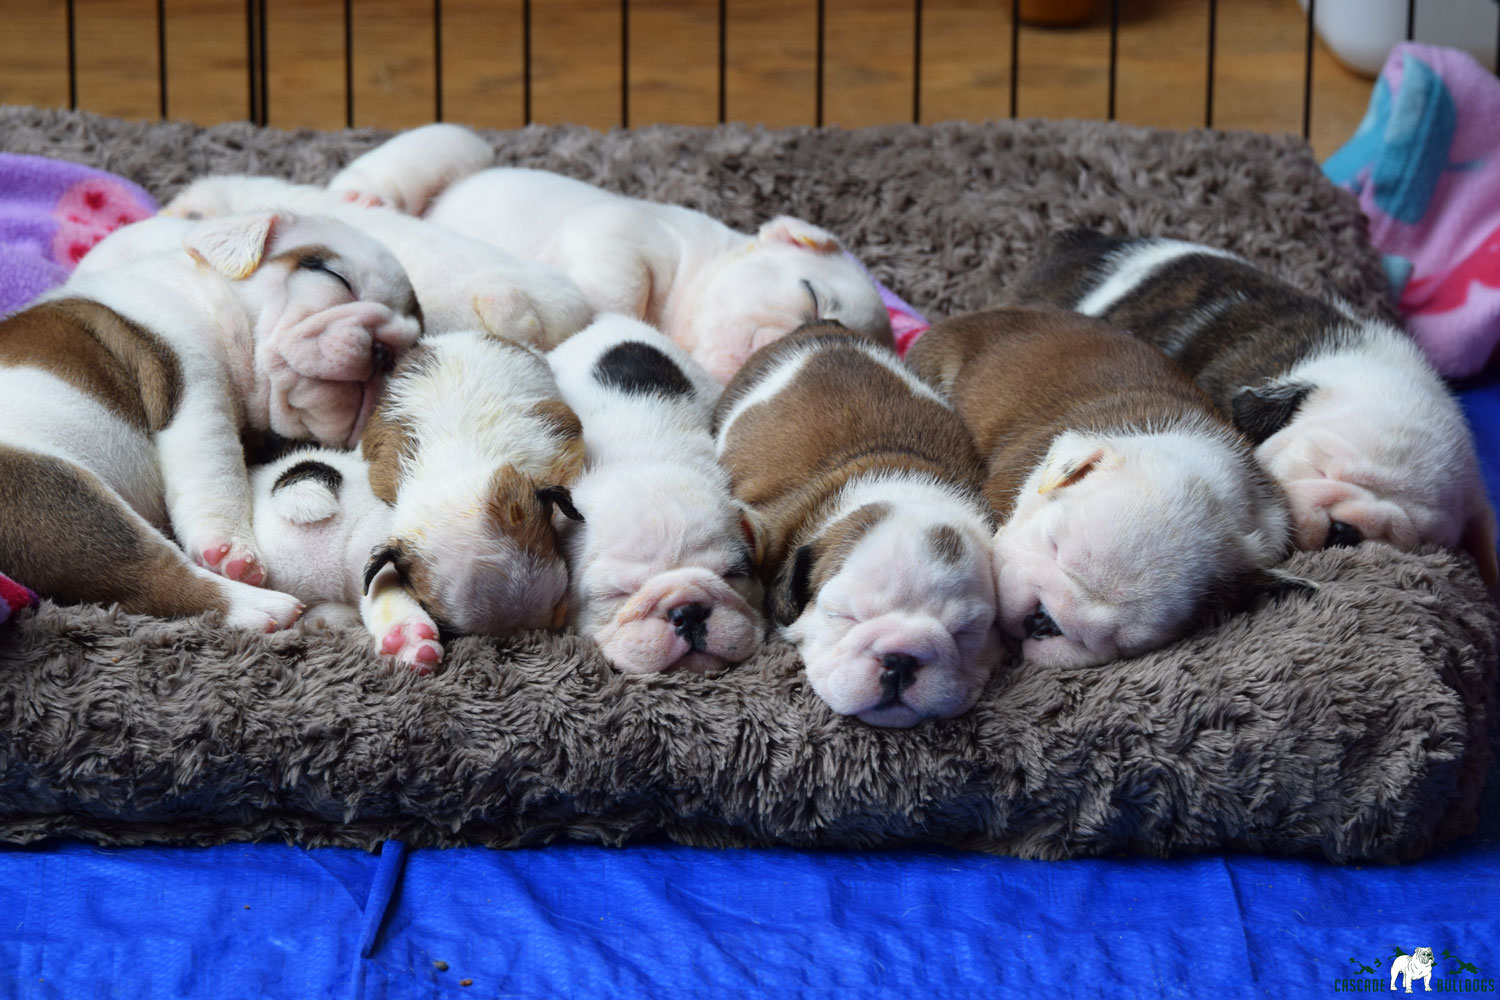 Snow White The Bulldog's litter of puppies March 2016